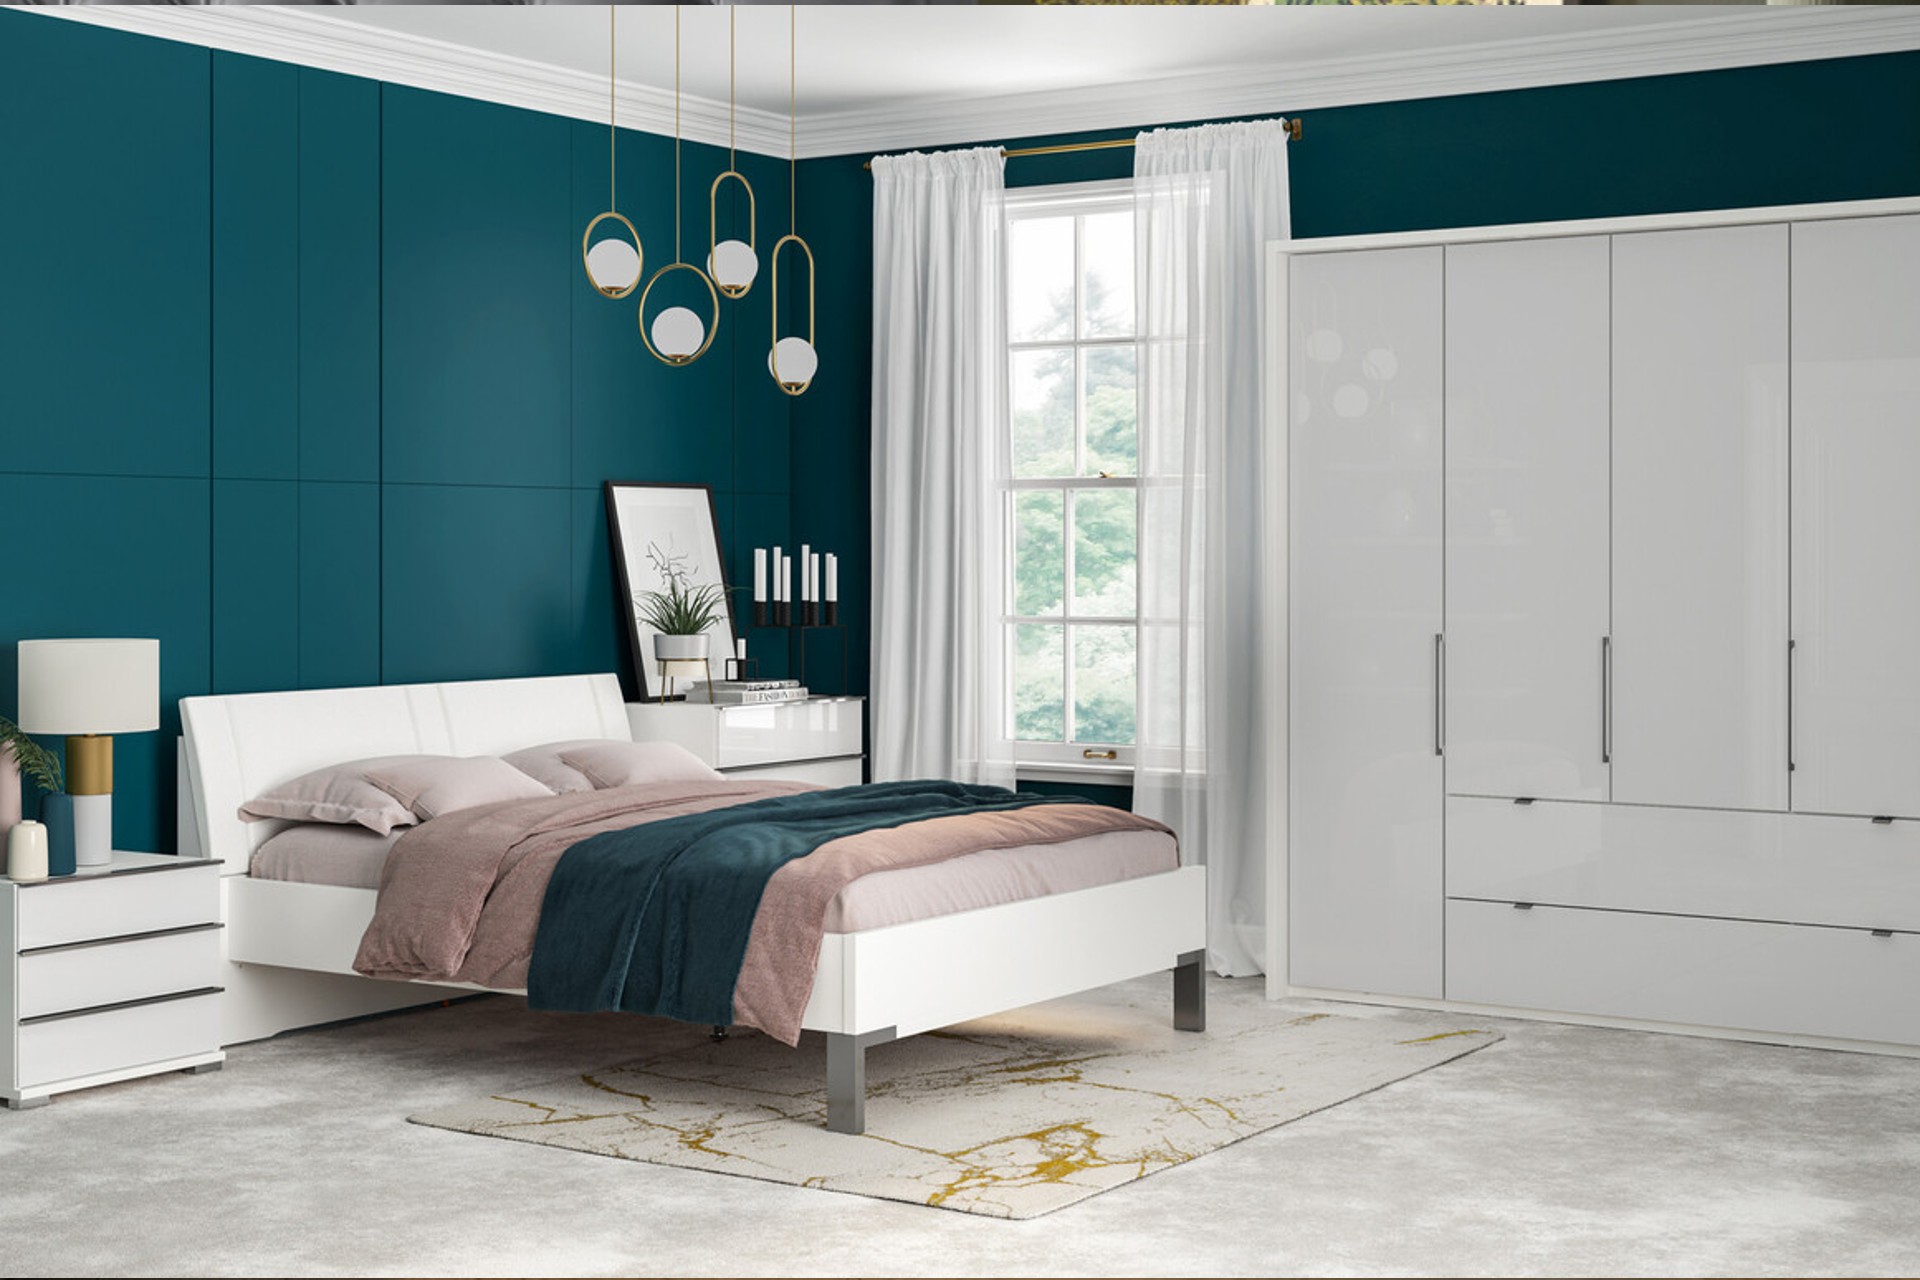 Sicily white bedroom furniture set. The white bedside table is pictured on the left hand side of the bedframe.